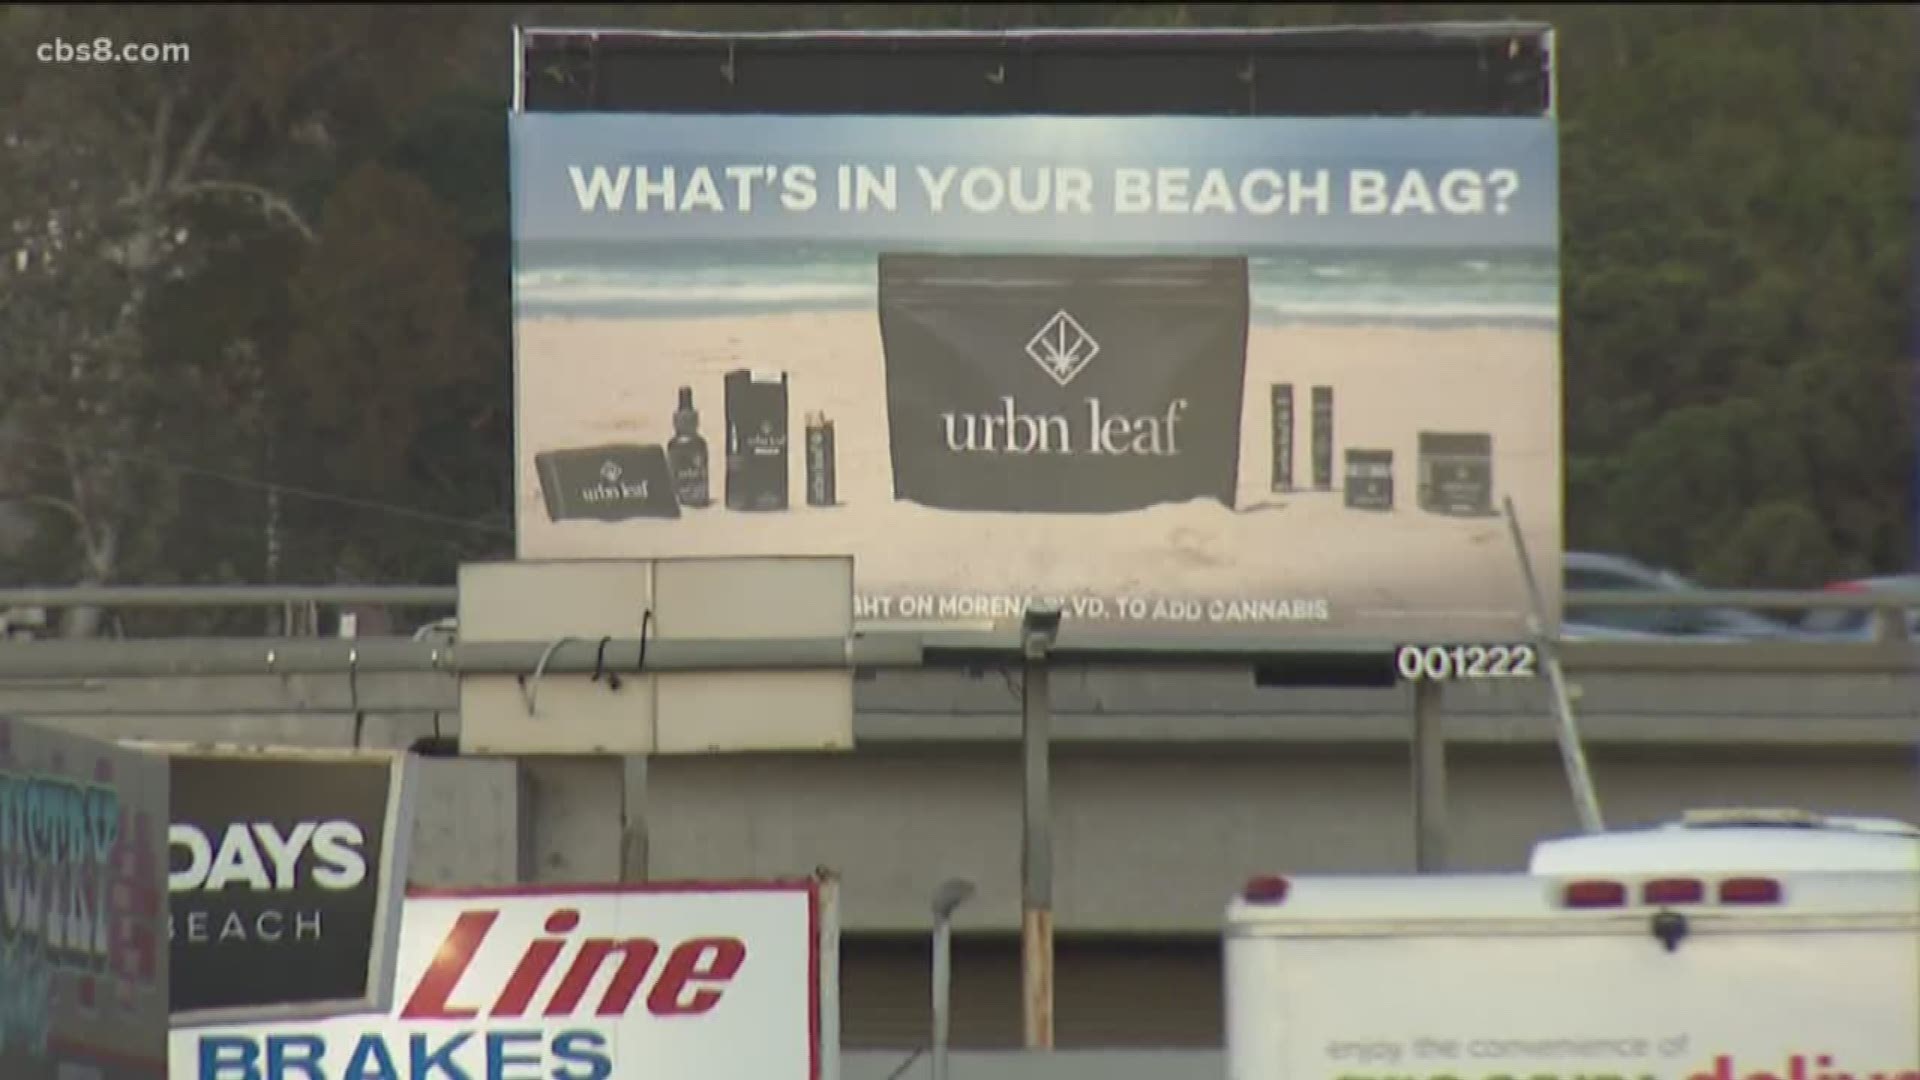 Billboards advertising cannabis are prominent in many areas of San Diego. While some locals see it as a problem, others say they see no cause for concern.